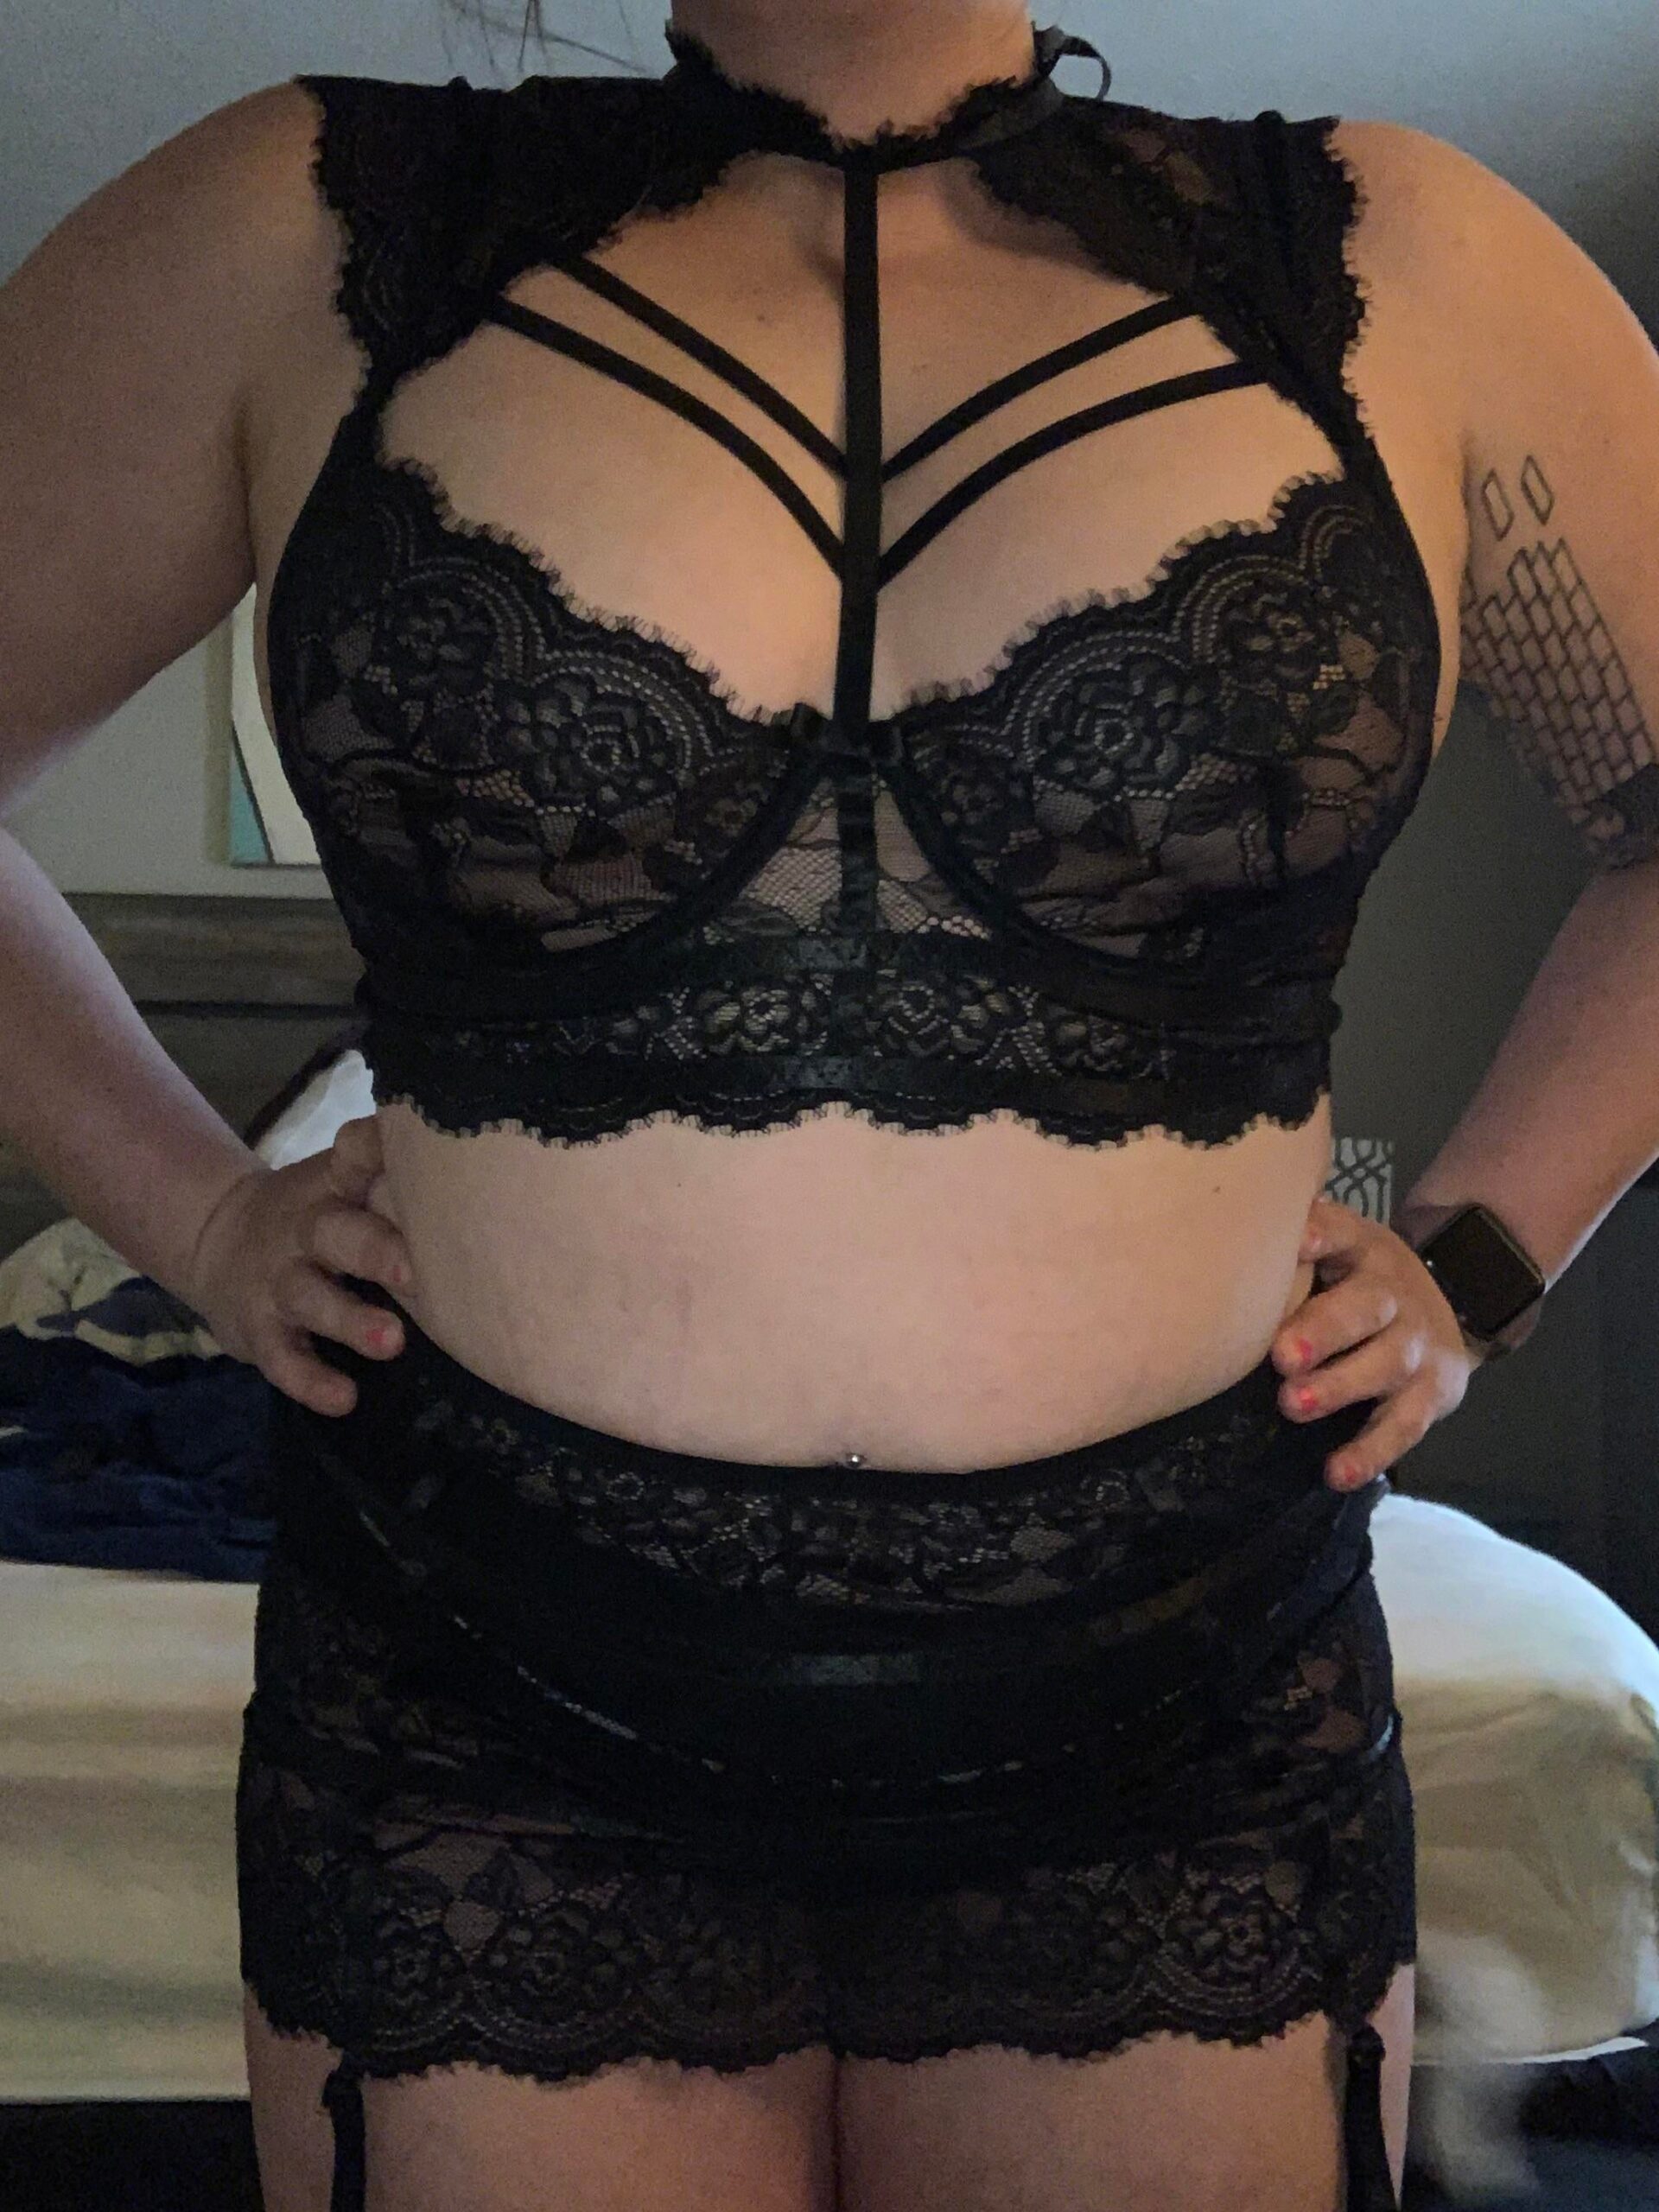 Chubby Big Tits -  New look for an upcoming Boudoir shoot 😊